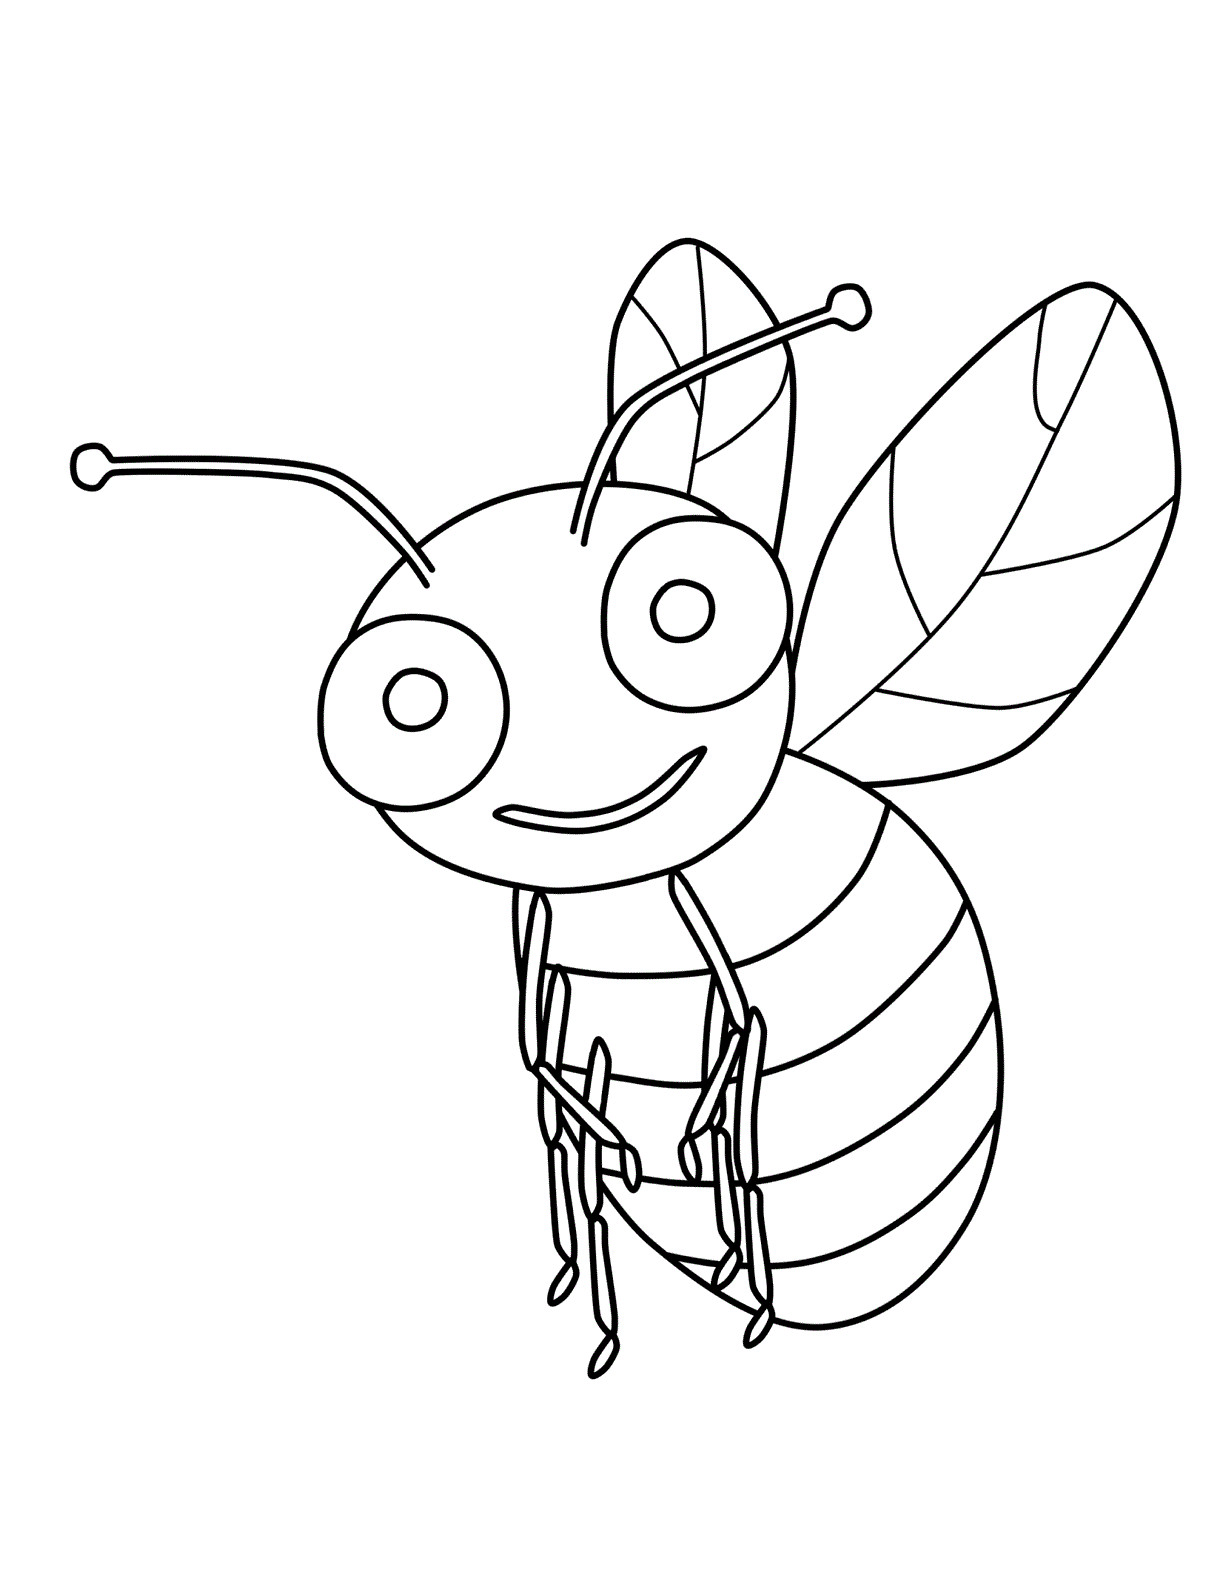 Printable Coloring For Kids
 Free Printable Bumble Bee Coloring Pages For Kids